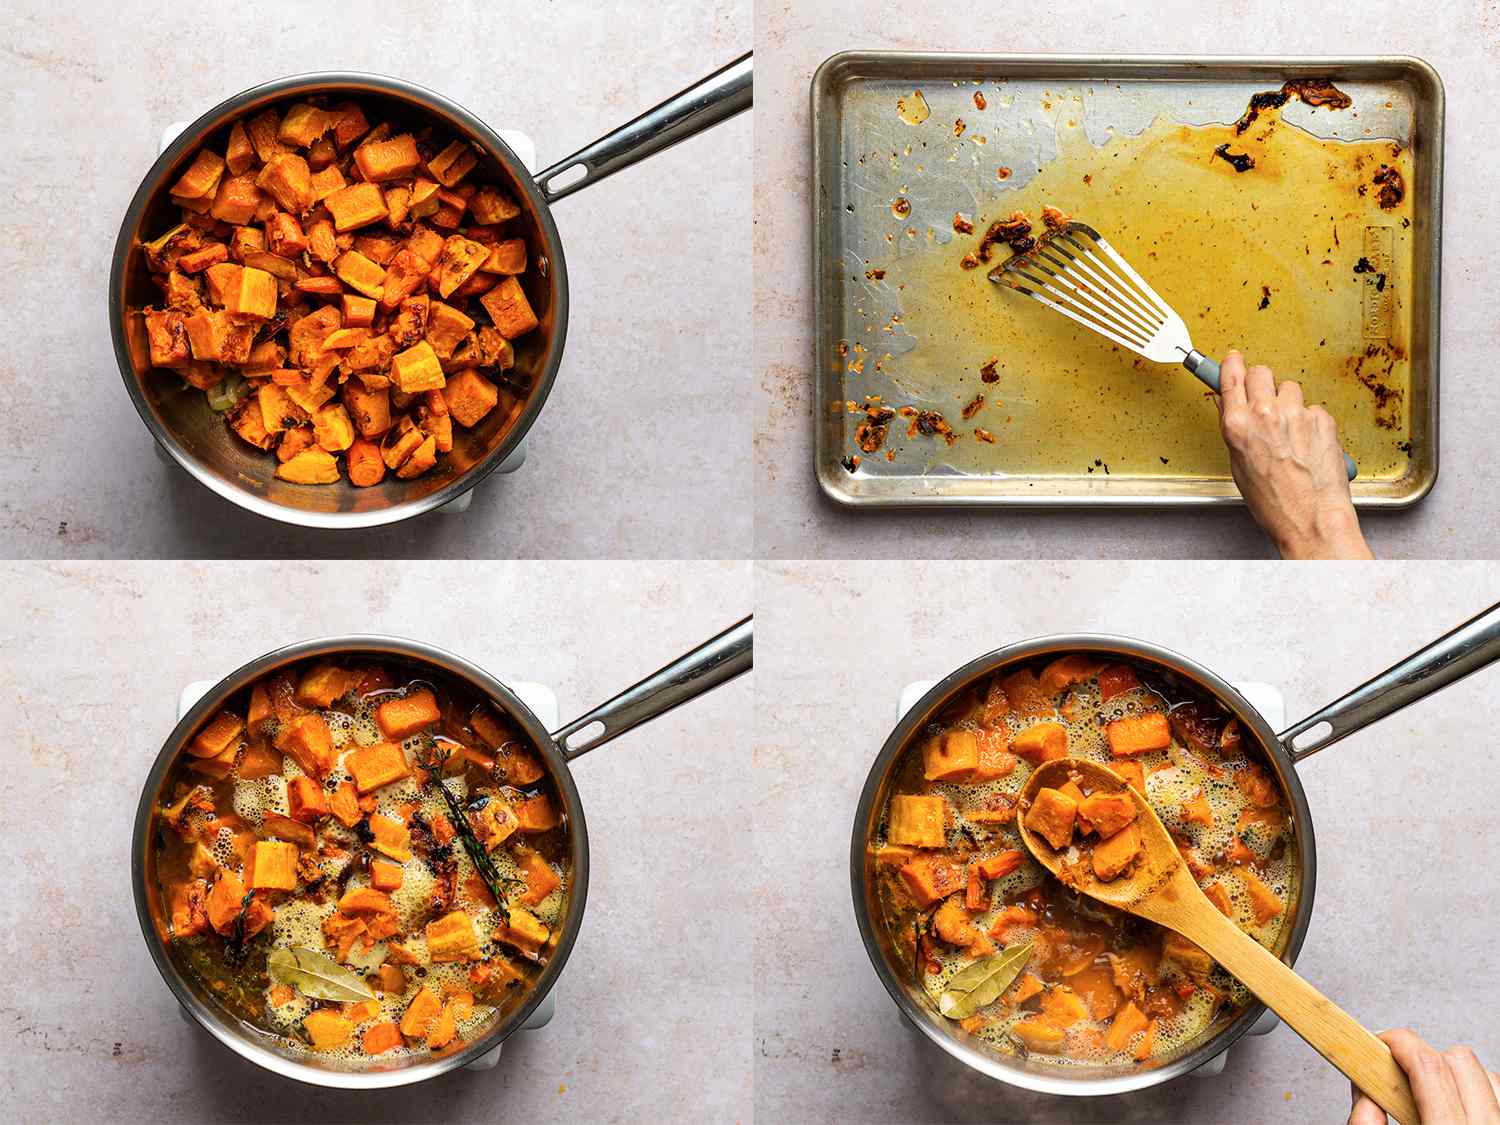 A four-image collage. The top left image shows squash and carrot added to the large saucepan containing the onion and garlic. The top right image shows a 1/2 cup of stock added to a baking sheet containing the browned bits of vegetables, which are being scraped up with a slotted spatula. The bottom left image shows stock with browned bits, remaining stock, thyme sprigs, and bay leaf inside of the large saucepan, simmering over medium-high heat. The bottom right image shows a wooden spoon lifting some of the cooked vegetables out of the saucepan, highlighting their texture.